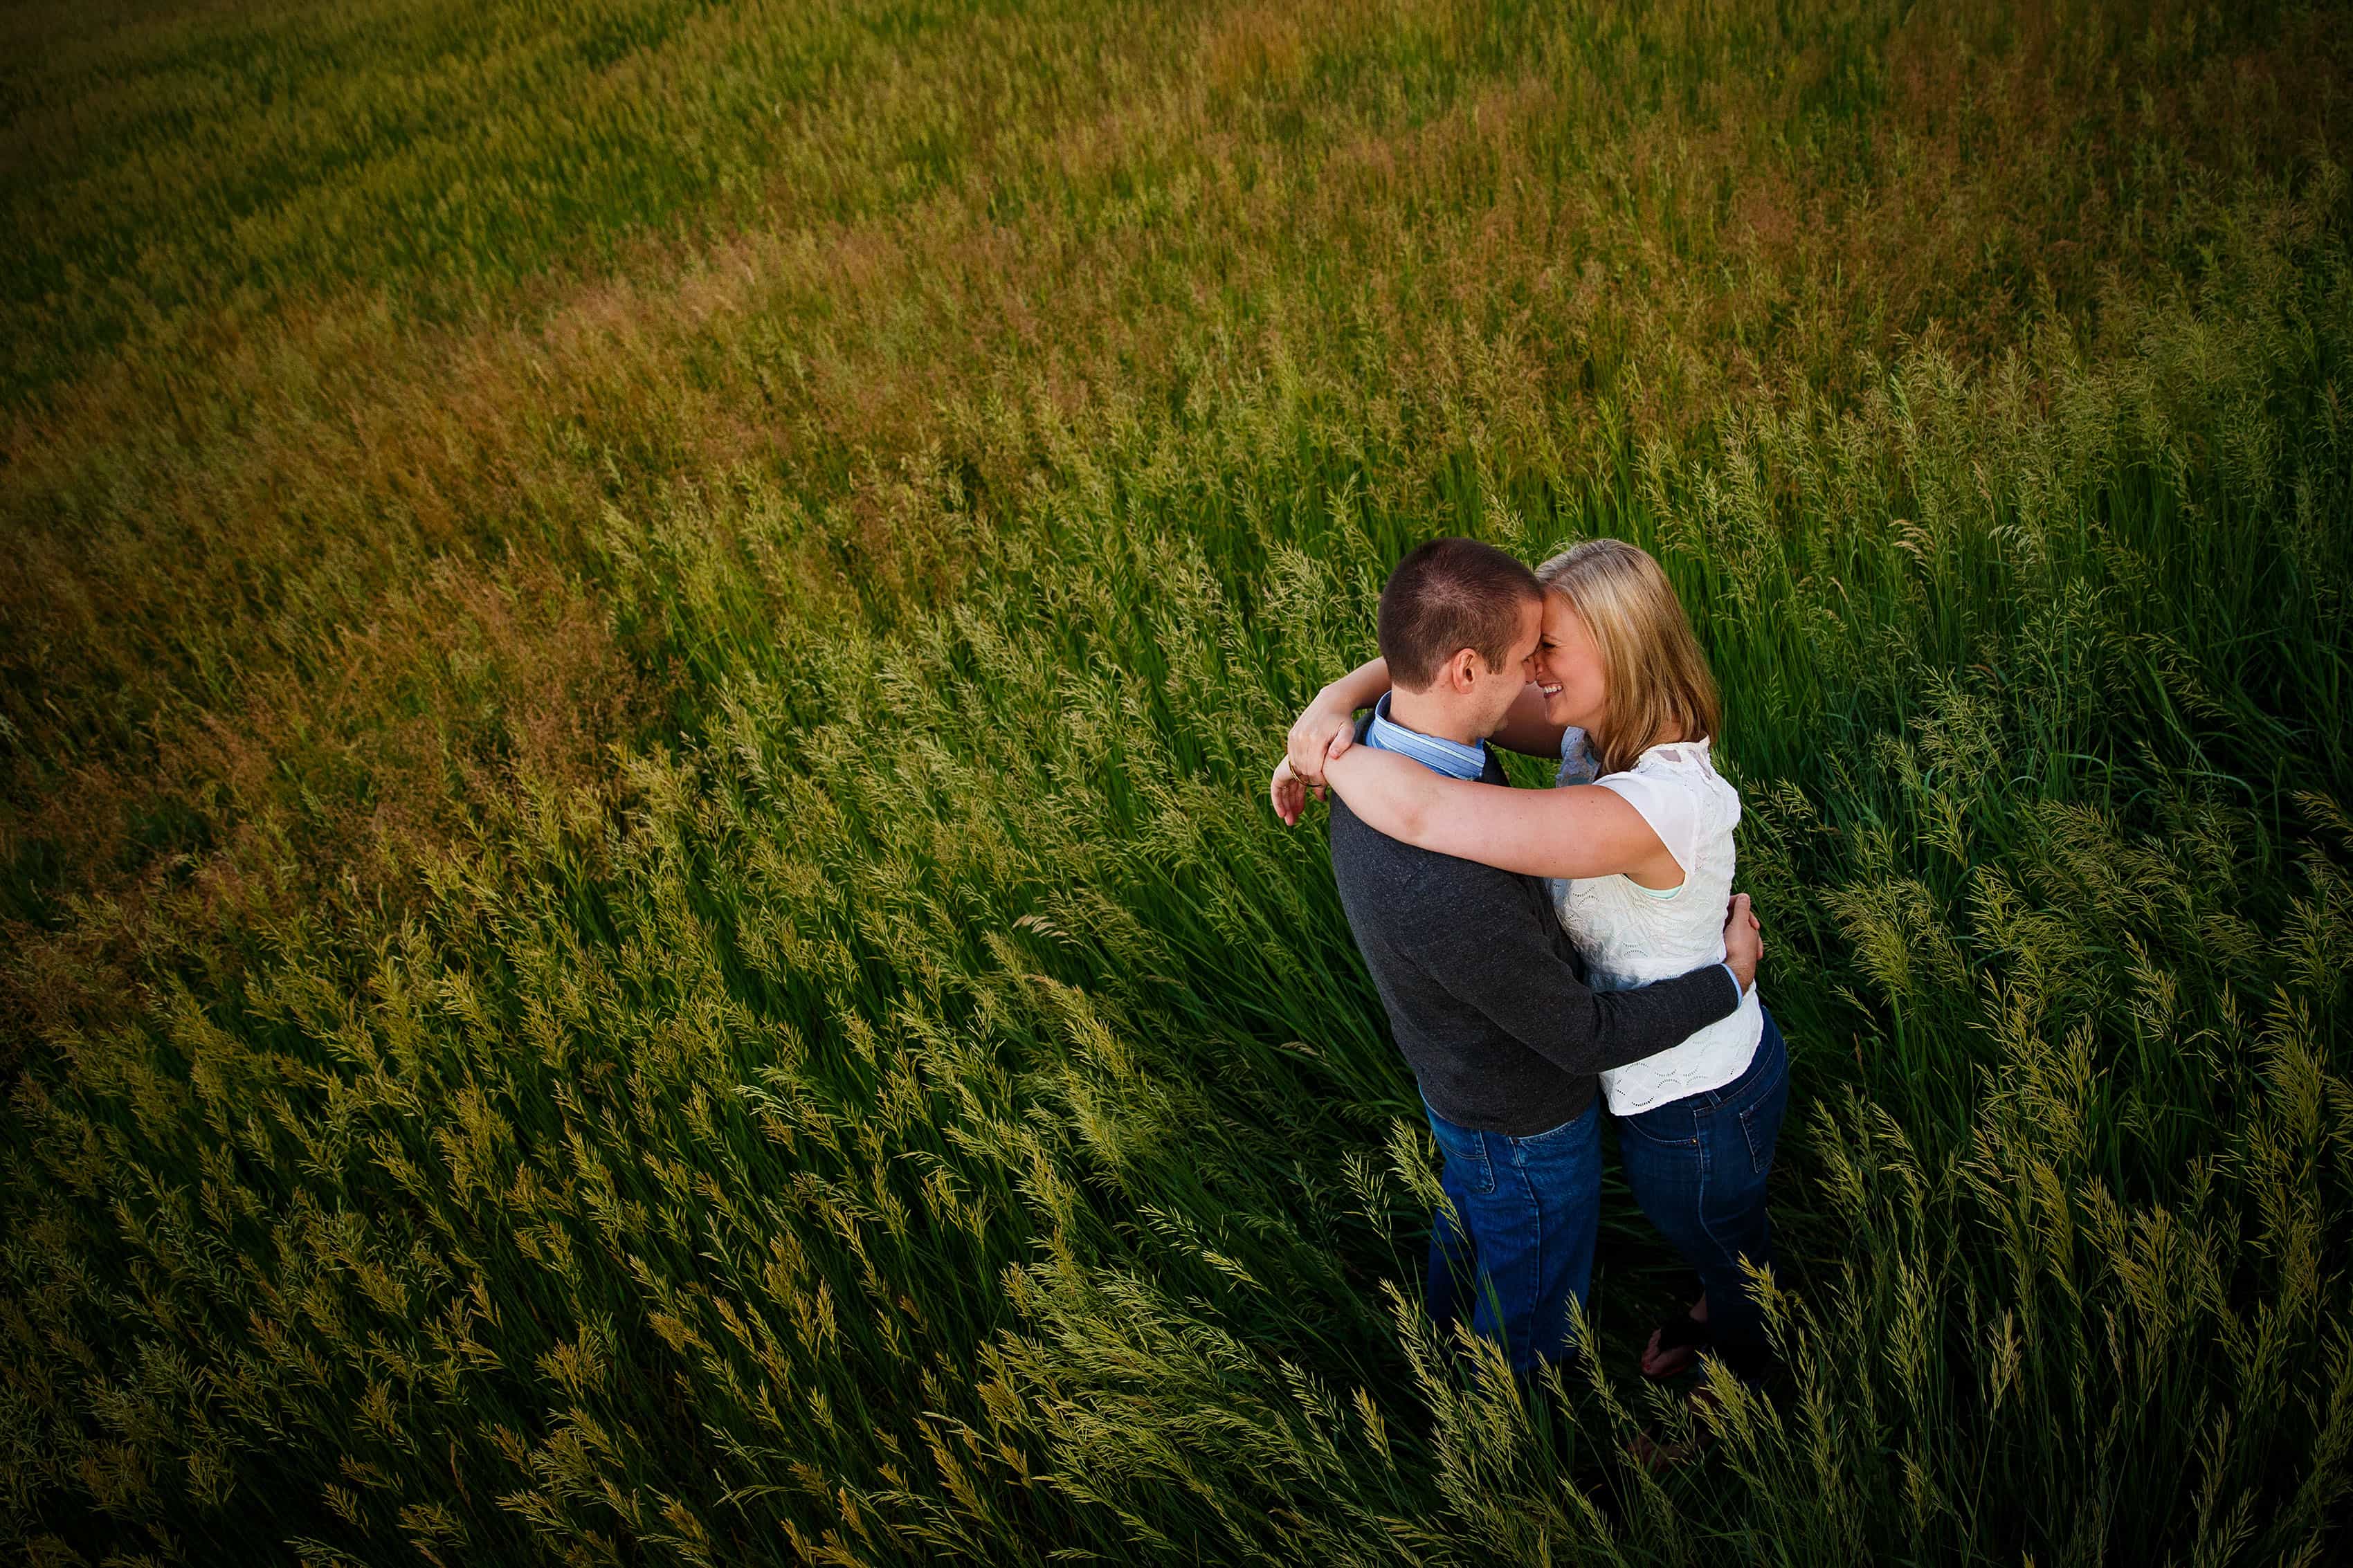 Ross hugs Emily at Roxborough State Park in a meadow during their engagement photos